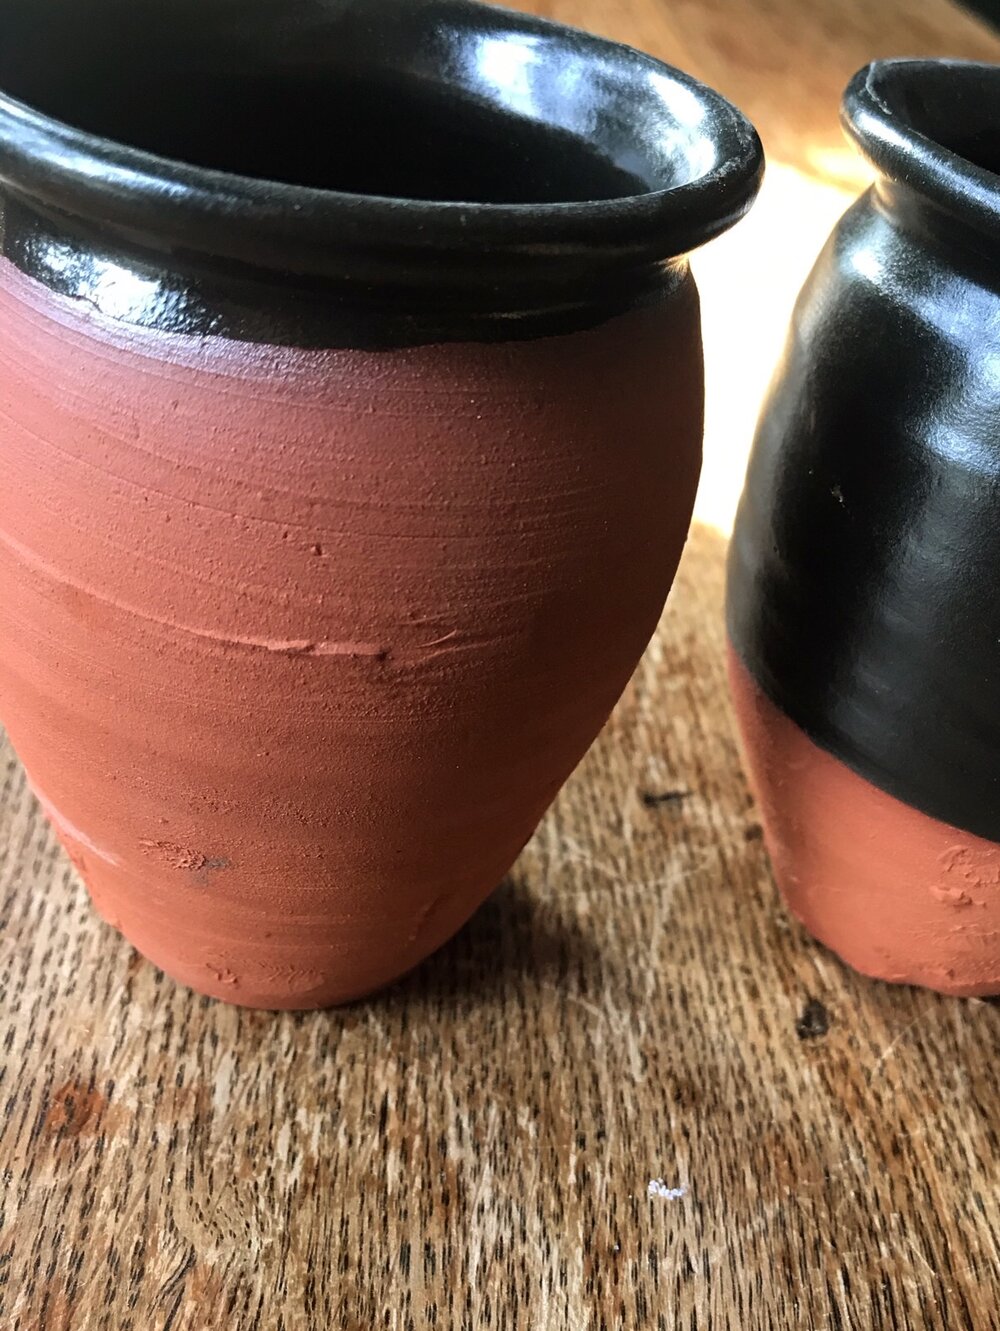 Cantarito Cocktail Cup — Shakers & Makers